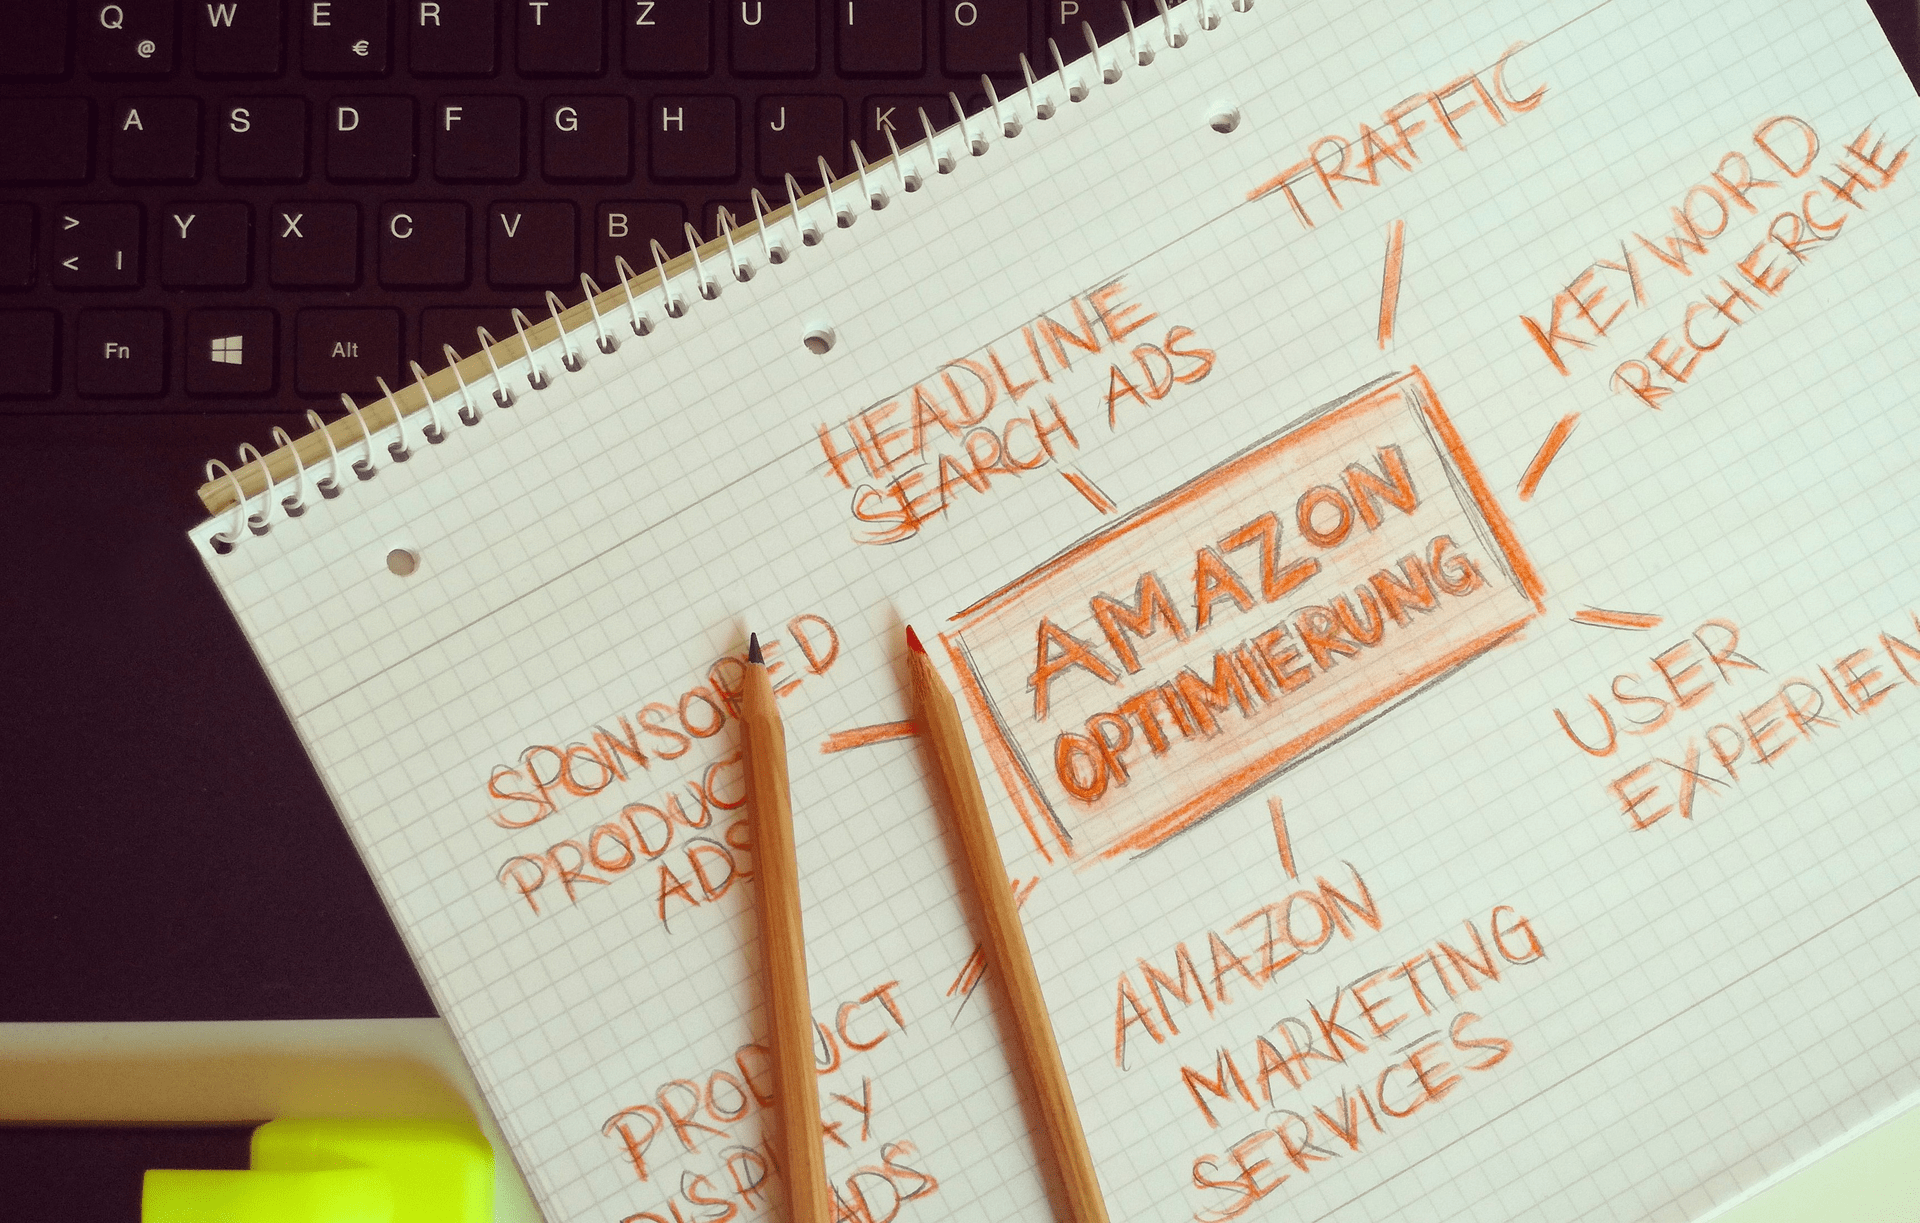 The most common mistakes by Amazon sellers